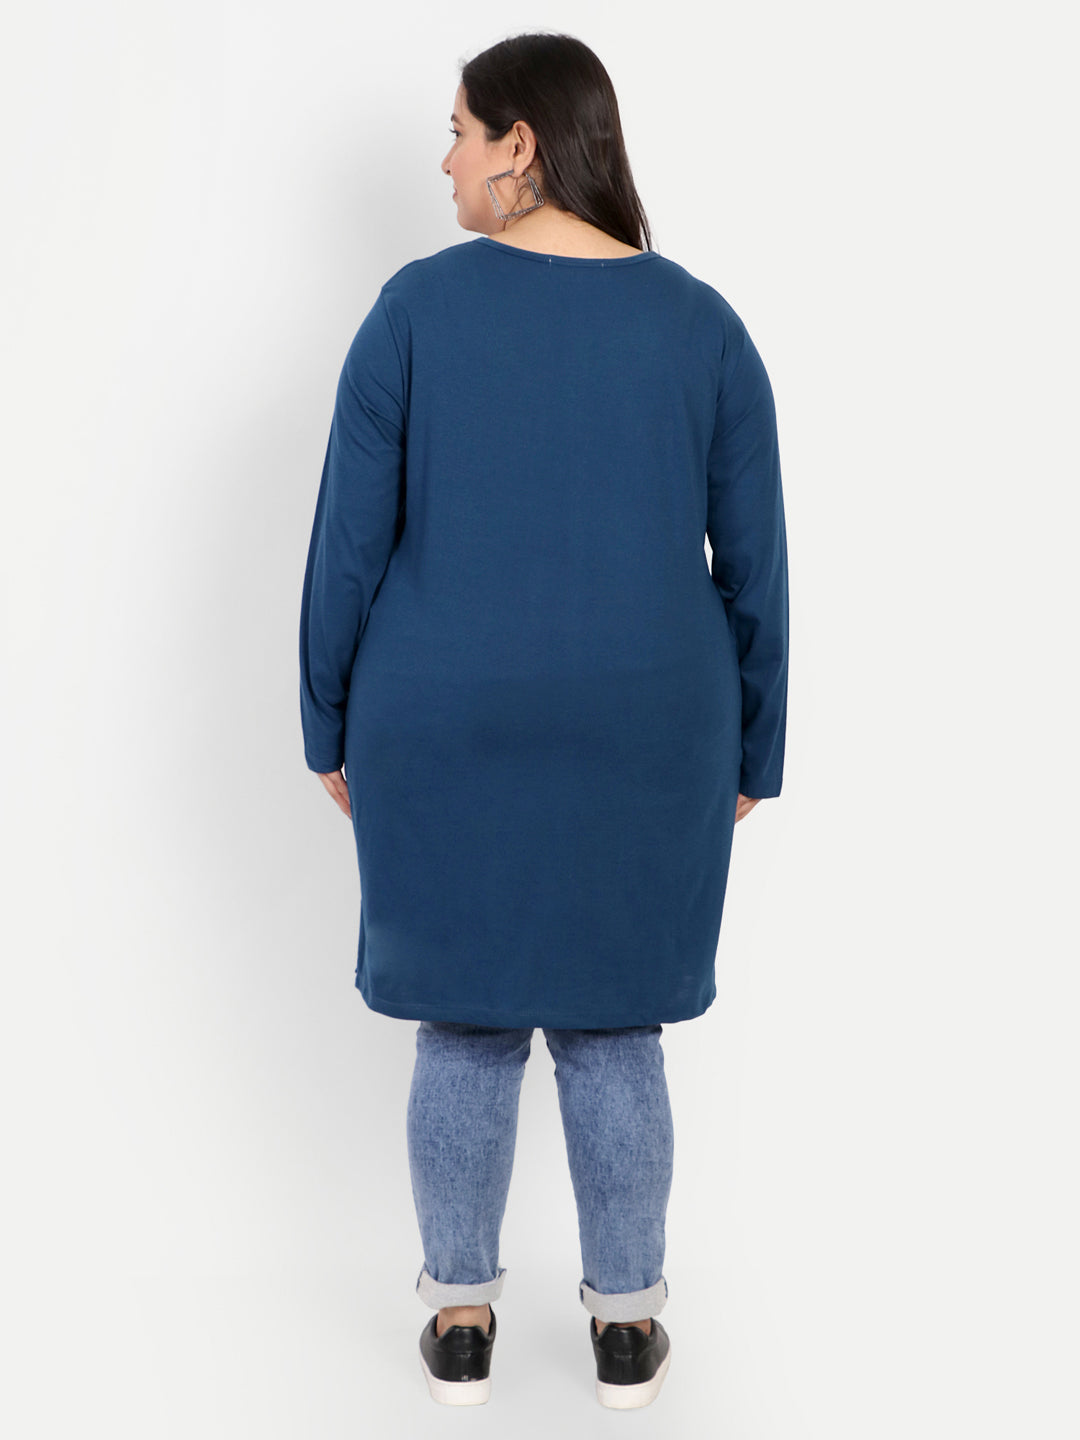 Cotton Long Top for Women Plus Size - Full Sleeve - Teal